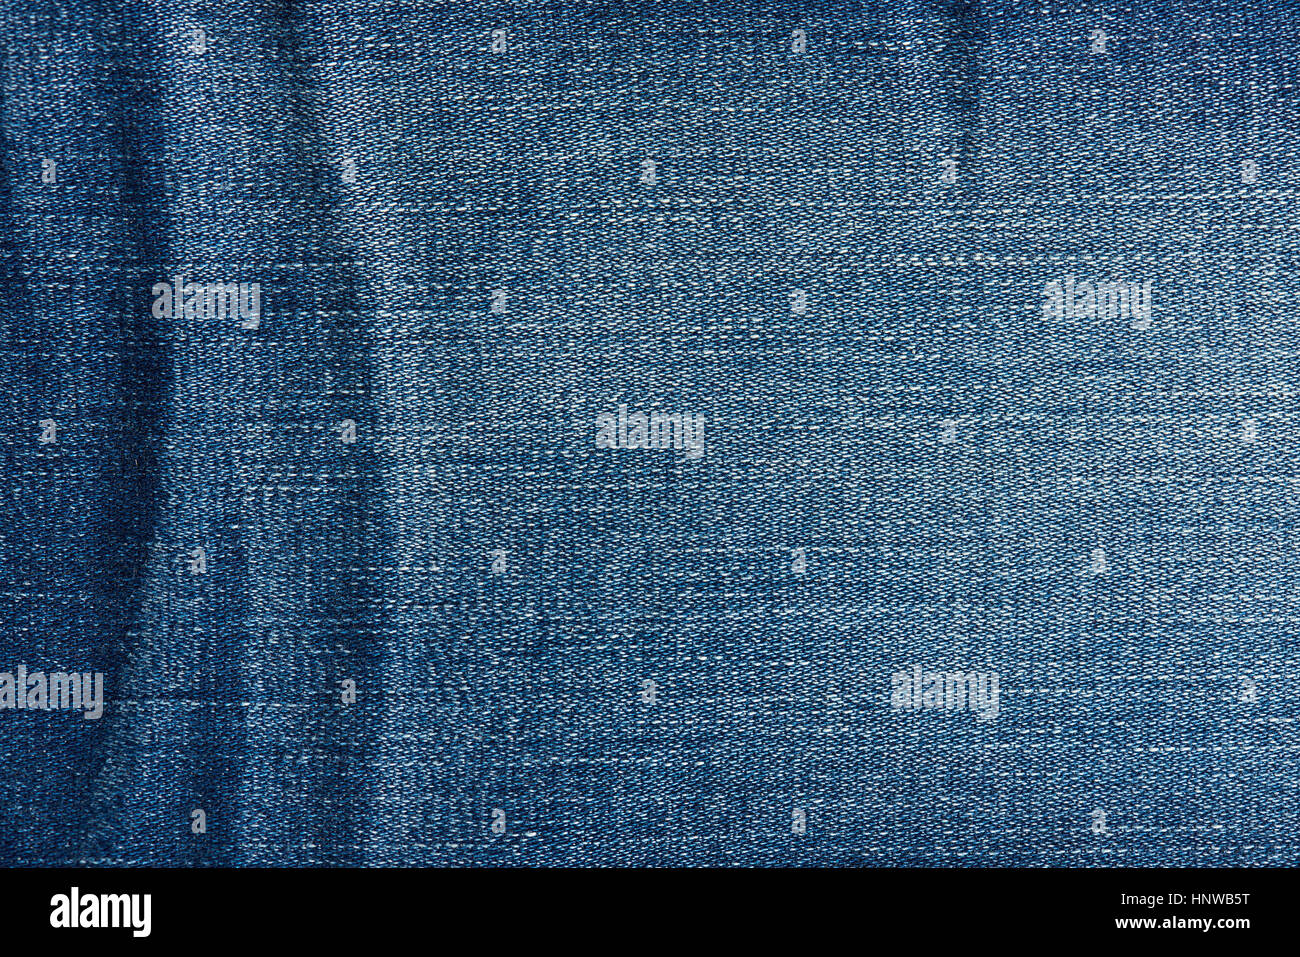 Blue jeans background close up of textile lines Stock Photo